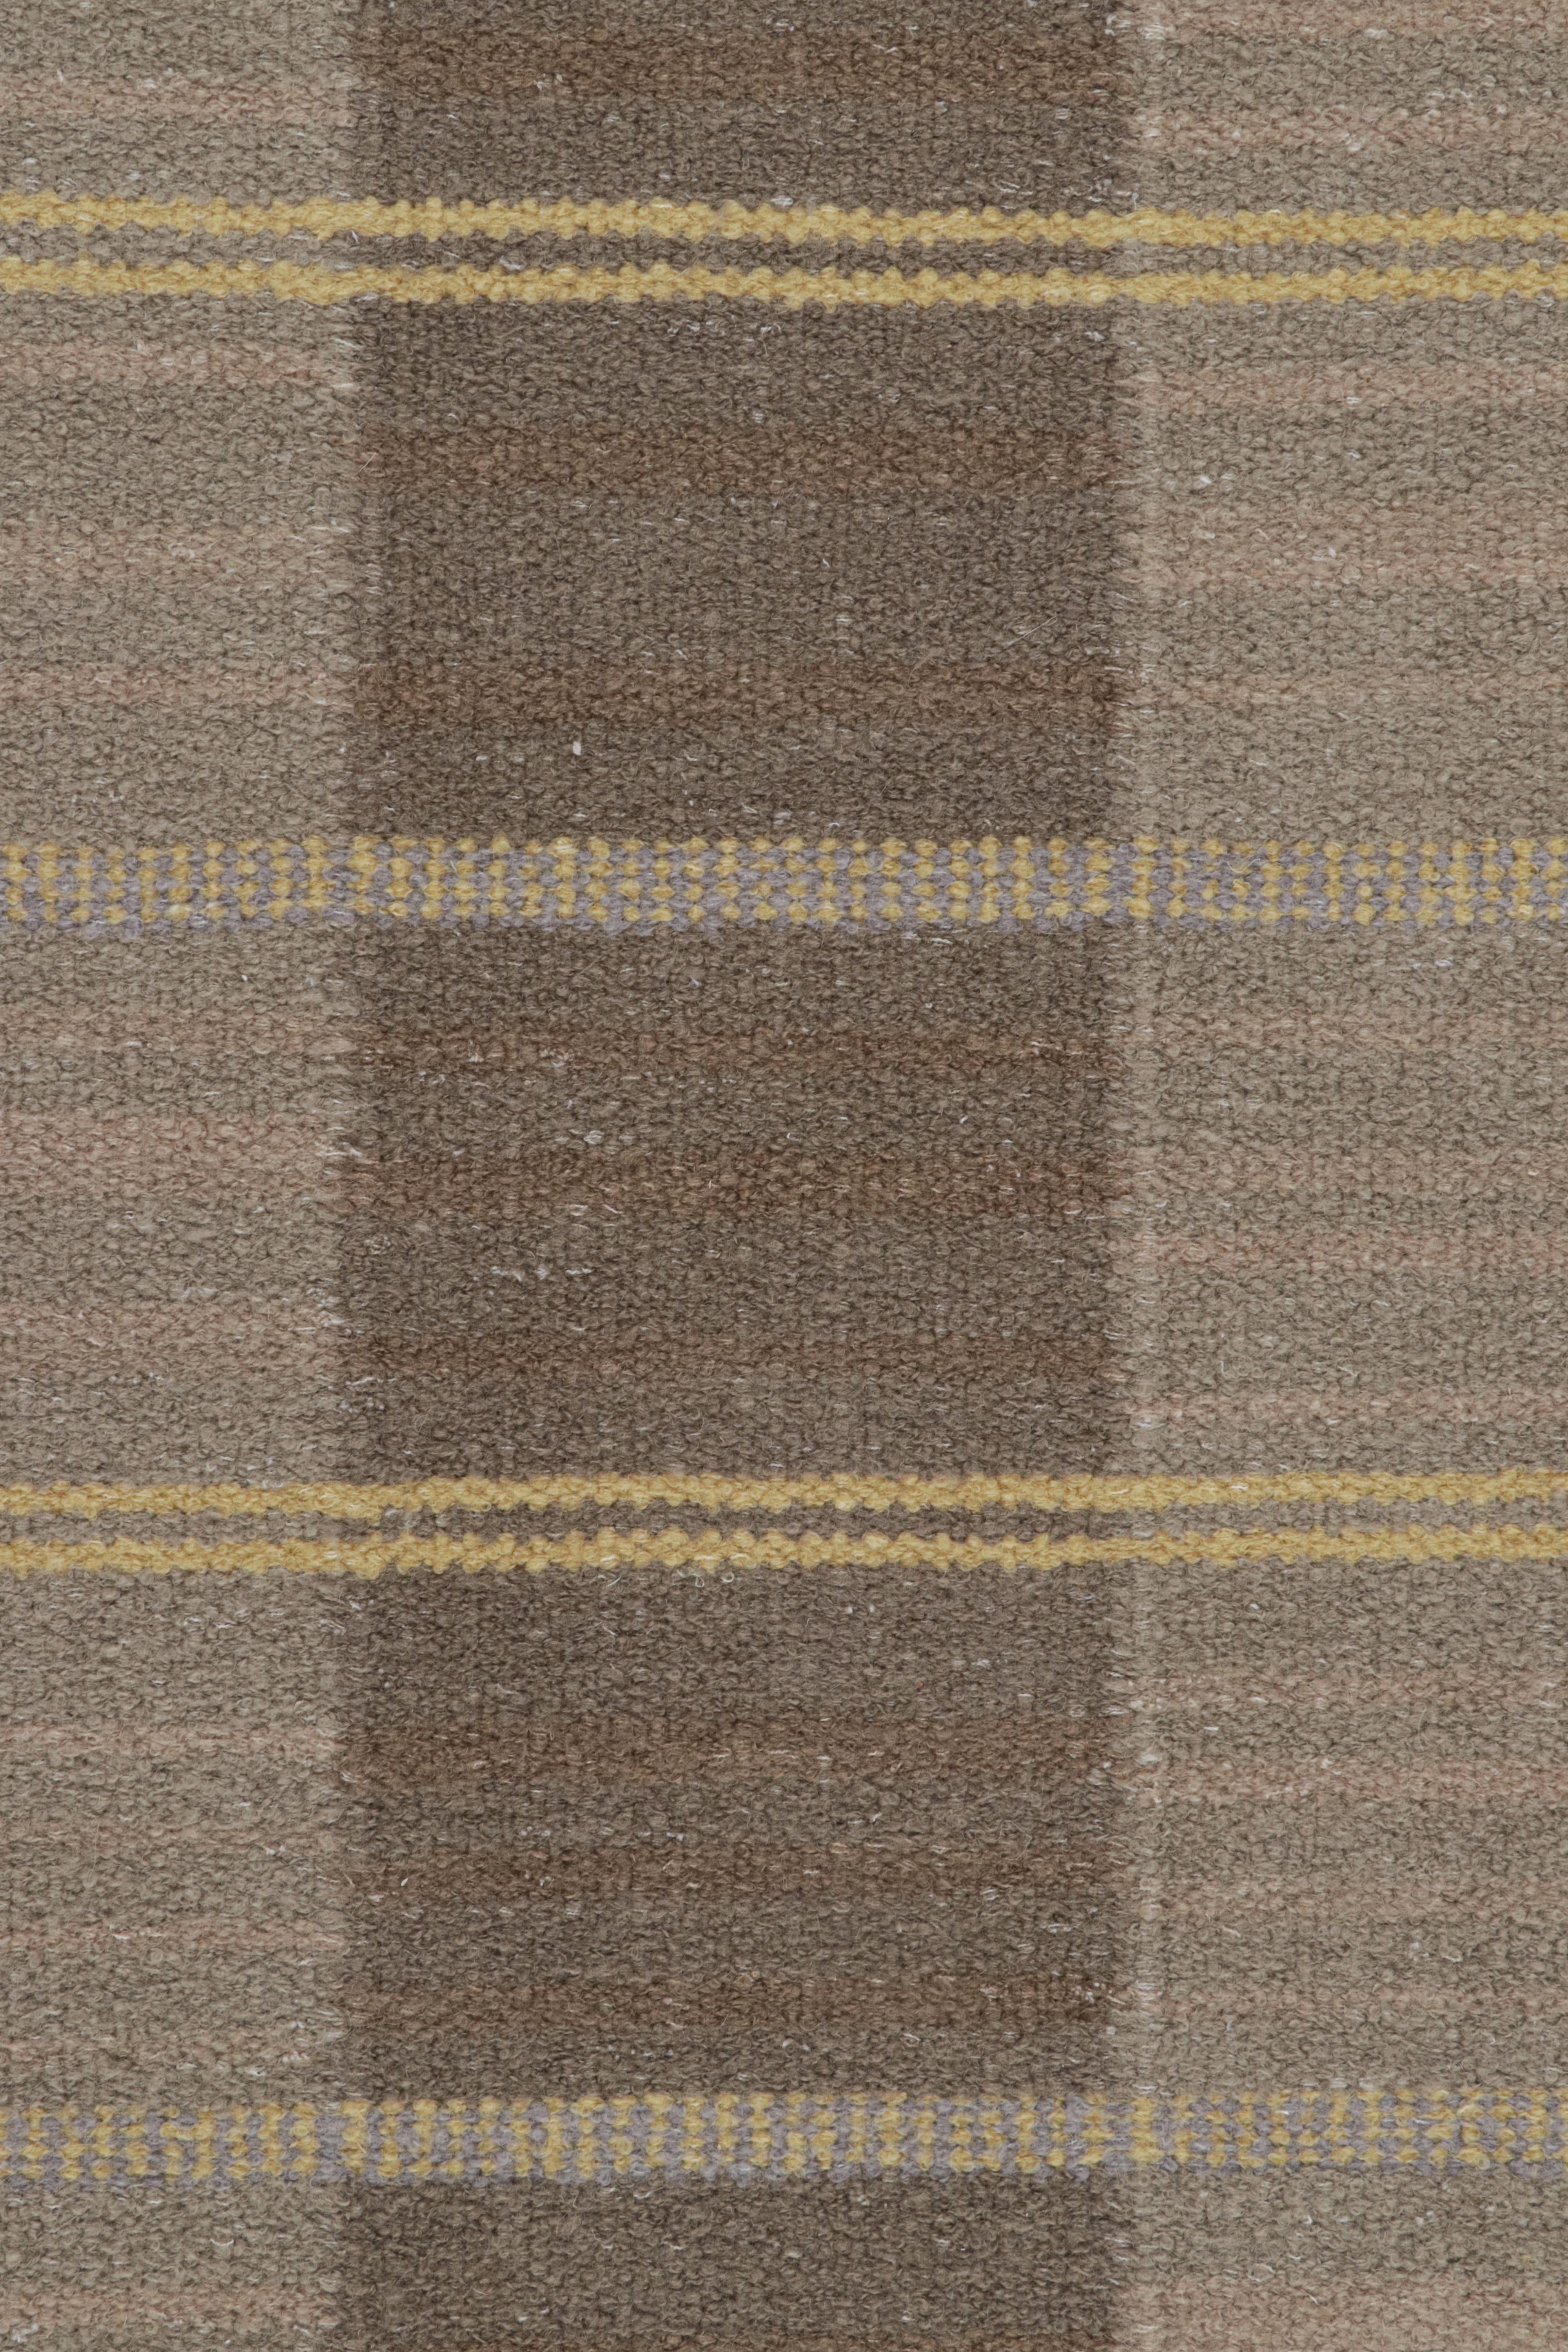 Modern Rug & Kilim’s Scandinavian Style Rug in Beige-Brown with Geometric Patterns For Sale